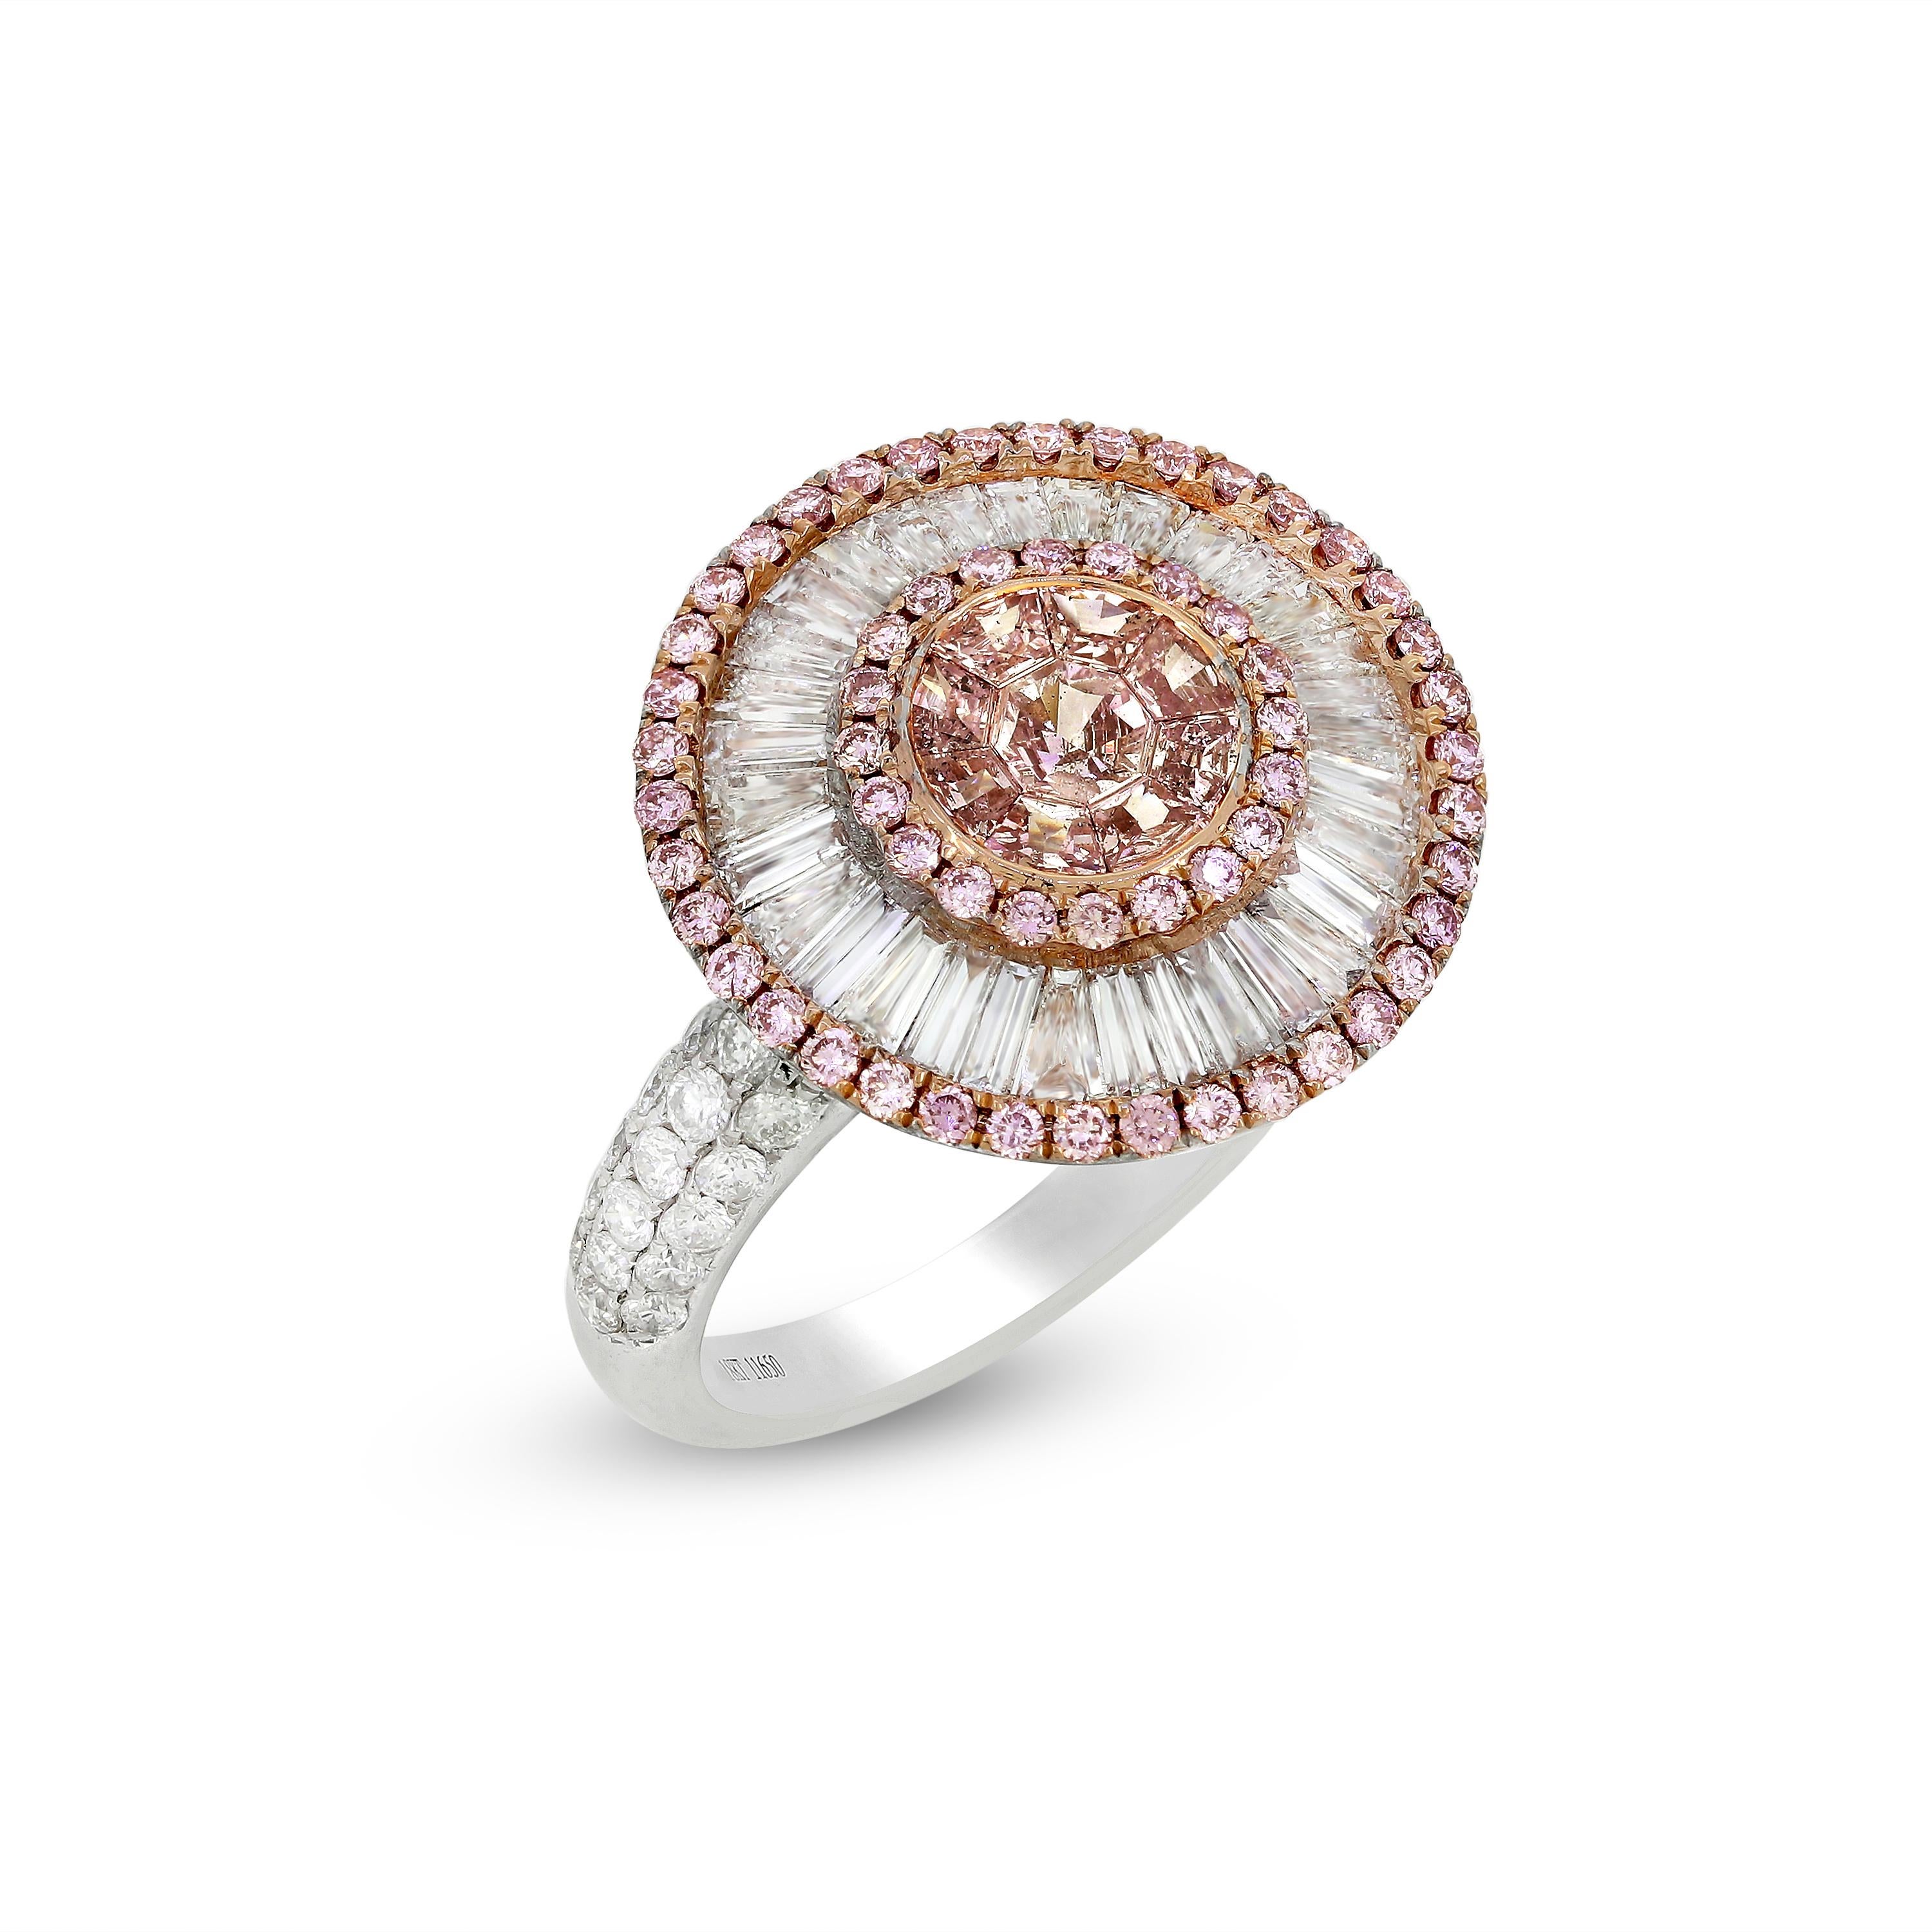 Sparkling baguette diamonds and stunning pink Diamonds come together to make this ring a gorgeous piece of jewelry. The design is at once alluring and eye-catching because of the beautifully clustered Diamonds. Accented with pave set diamonds on the